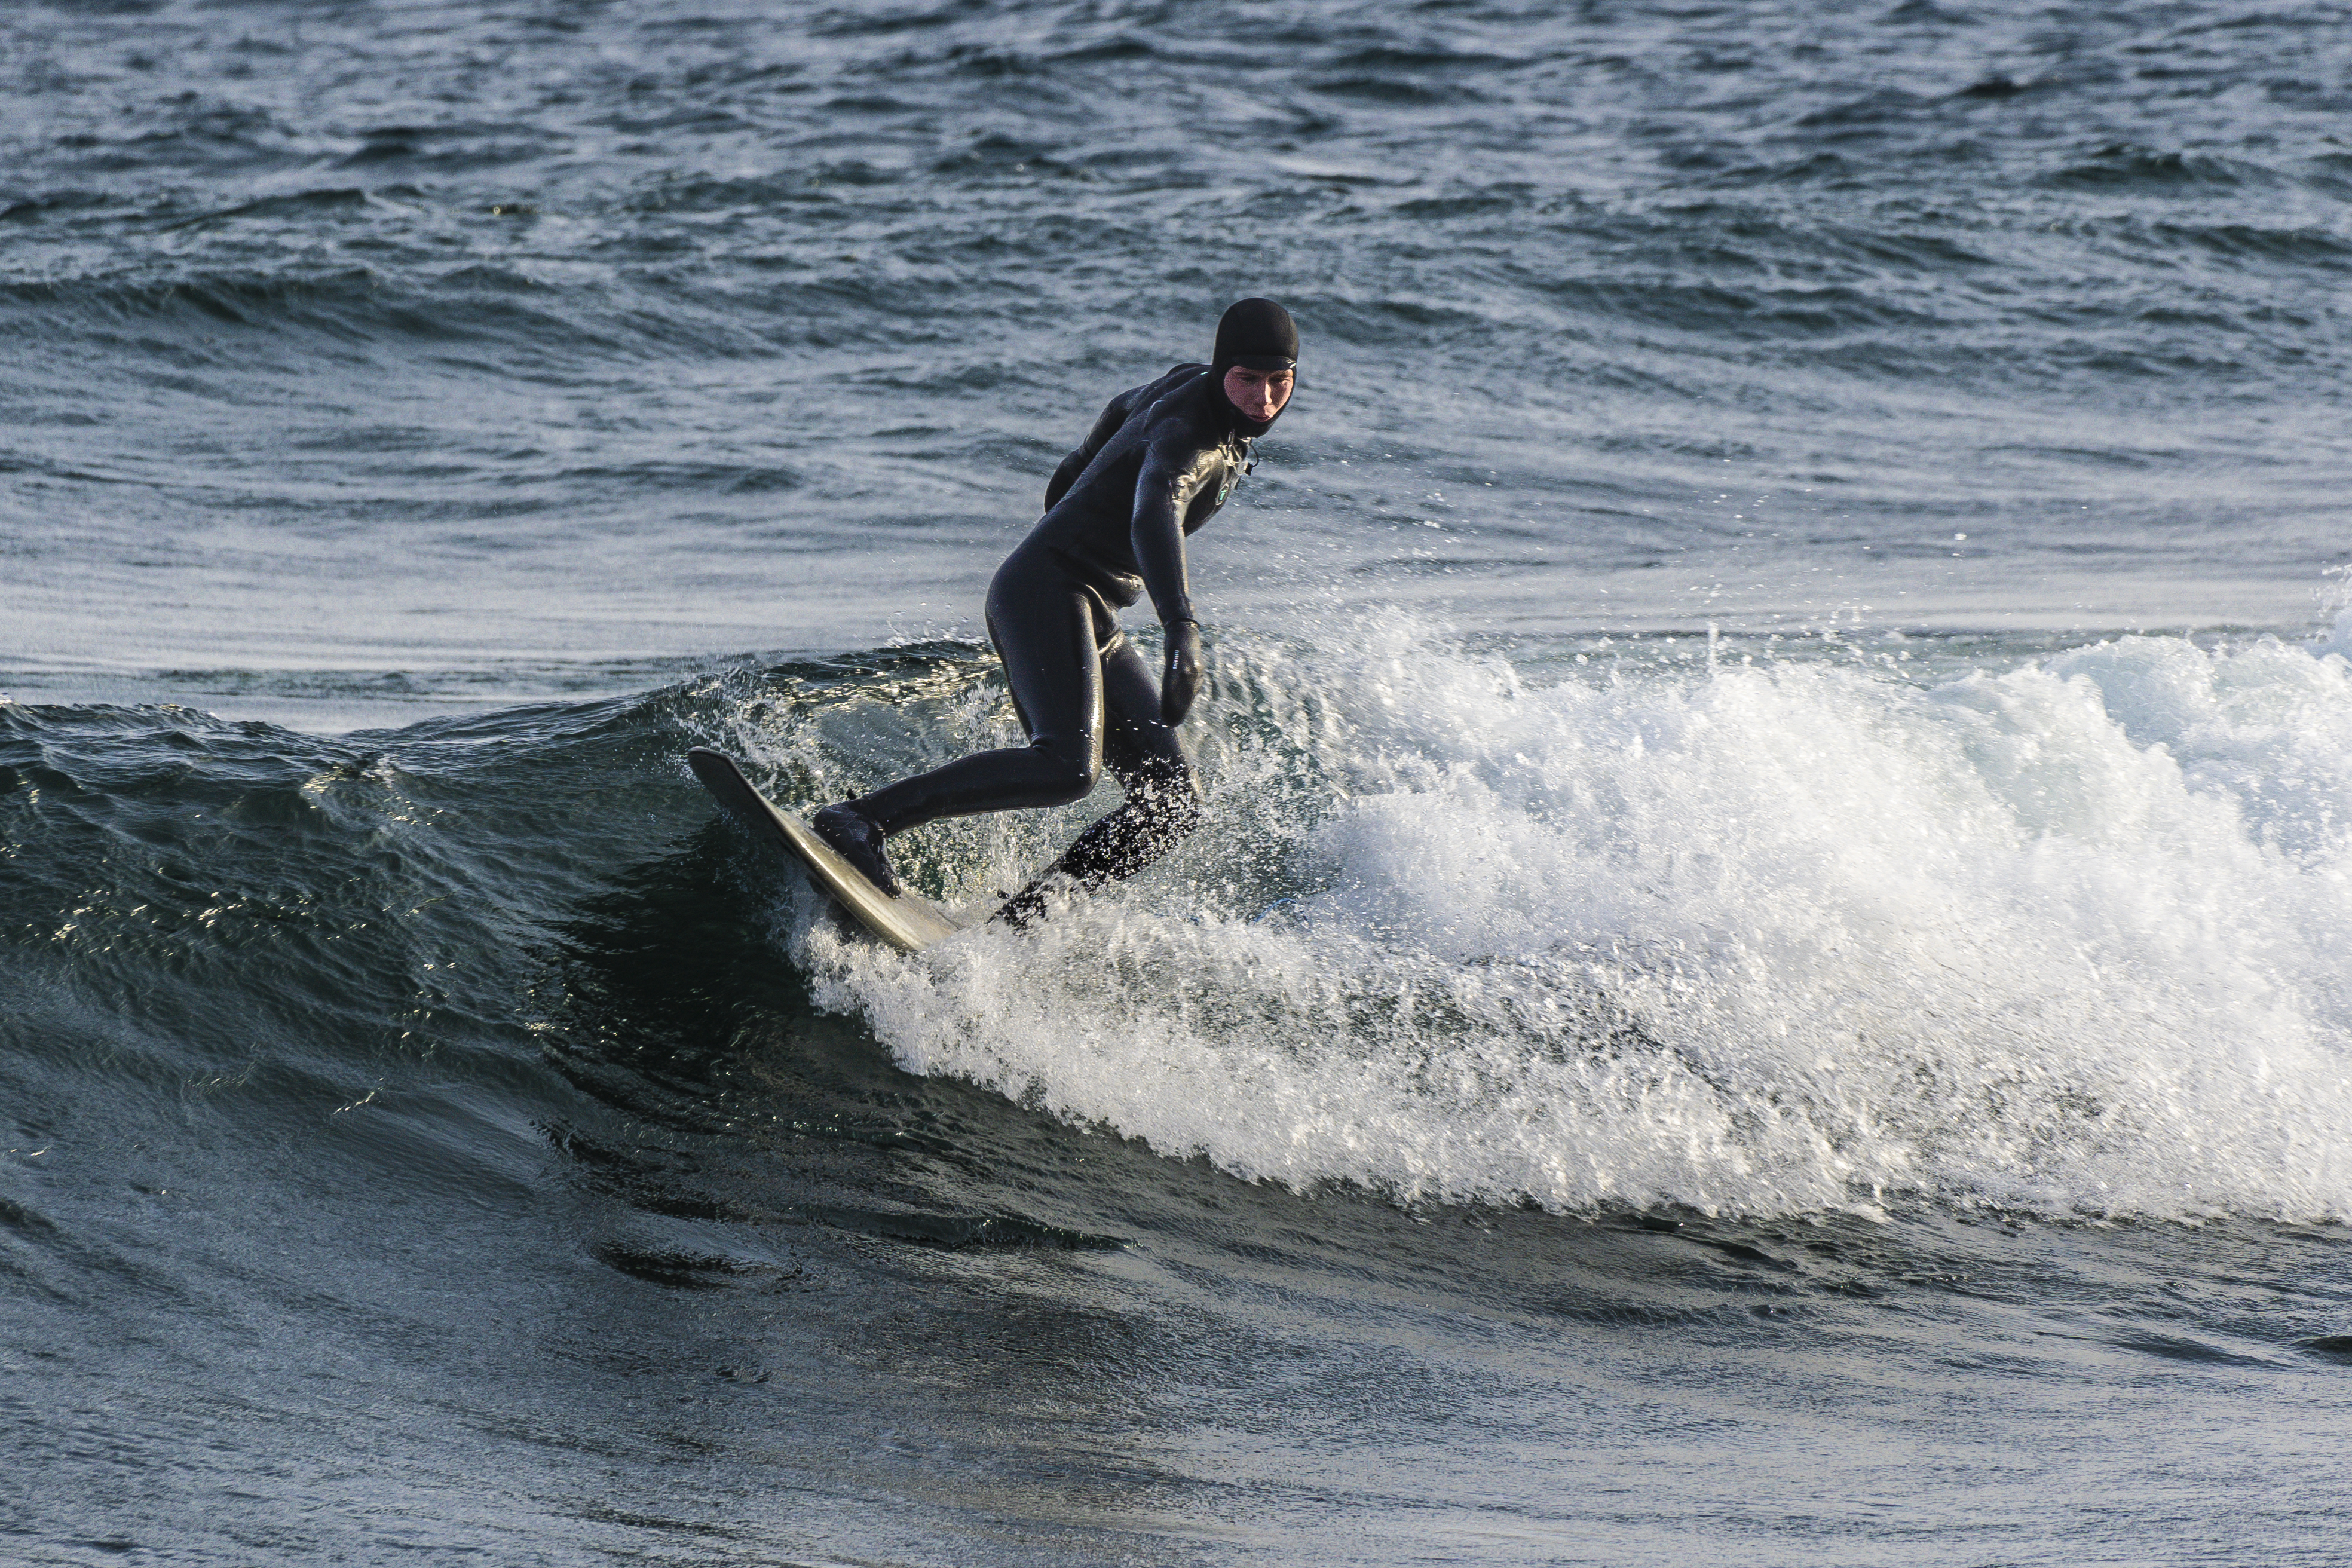 a person in a black wetsuit surfs on white-capped lake waves under a blue sky